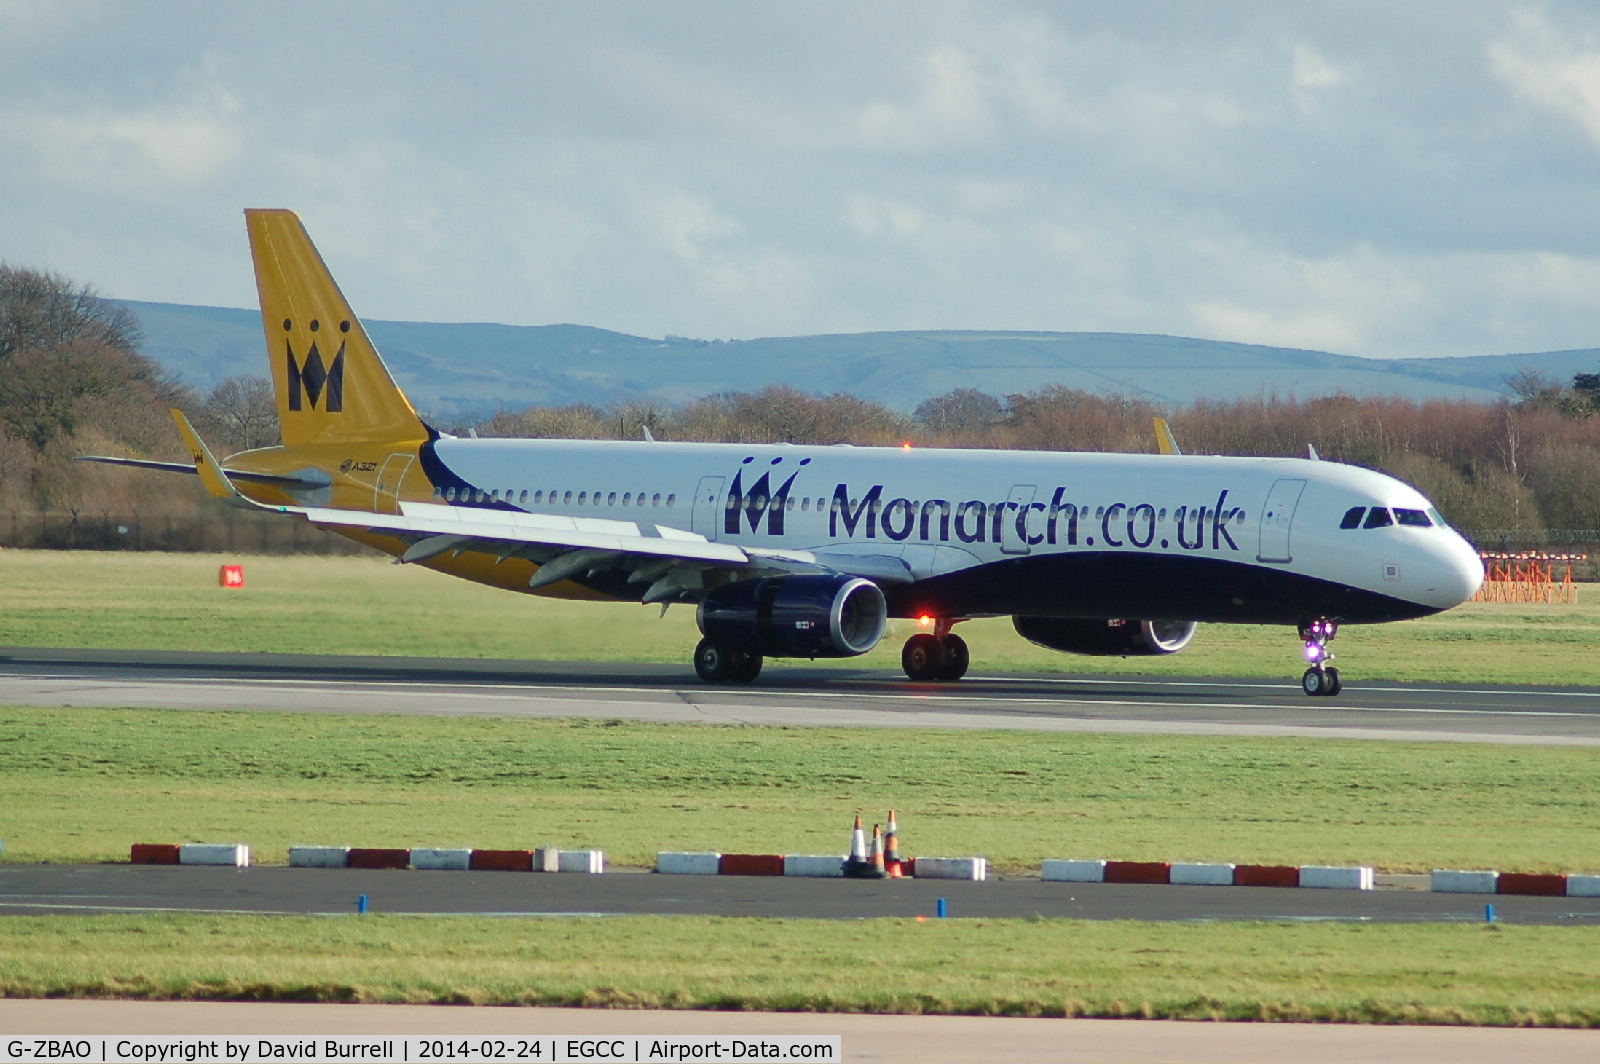 G-ZBAO, 2014 Airbus A321-231 C/N 6126, Airbus A321-231(WL) G-ZBAO Monarch Airlines landed at Manchester Airport.